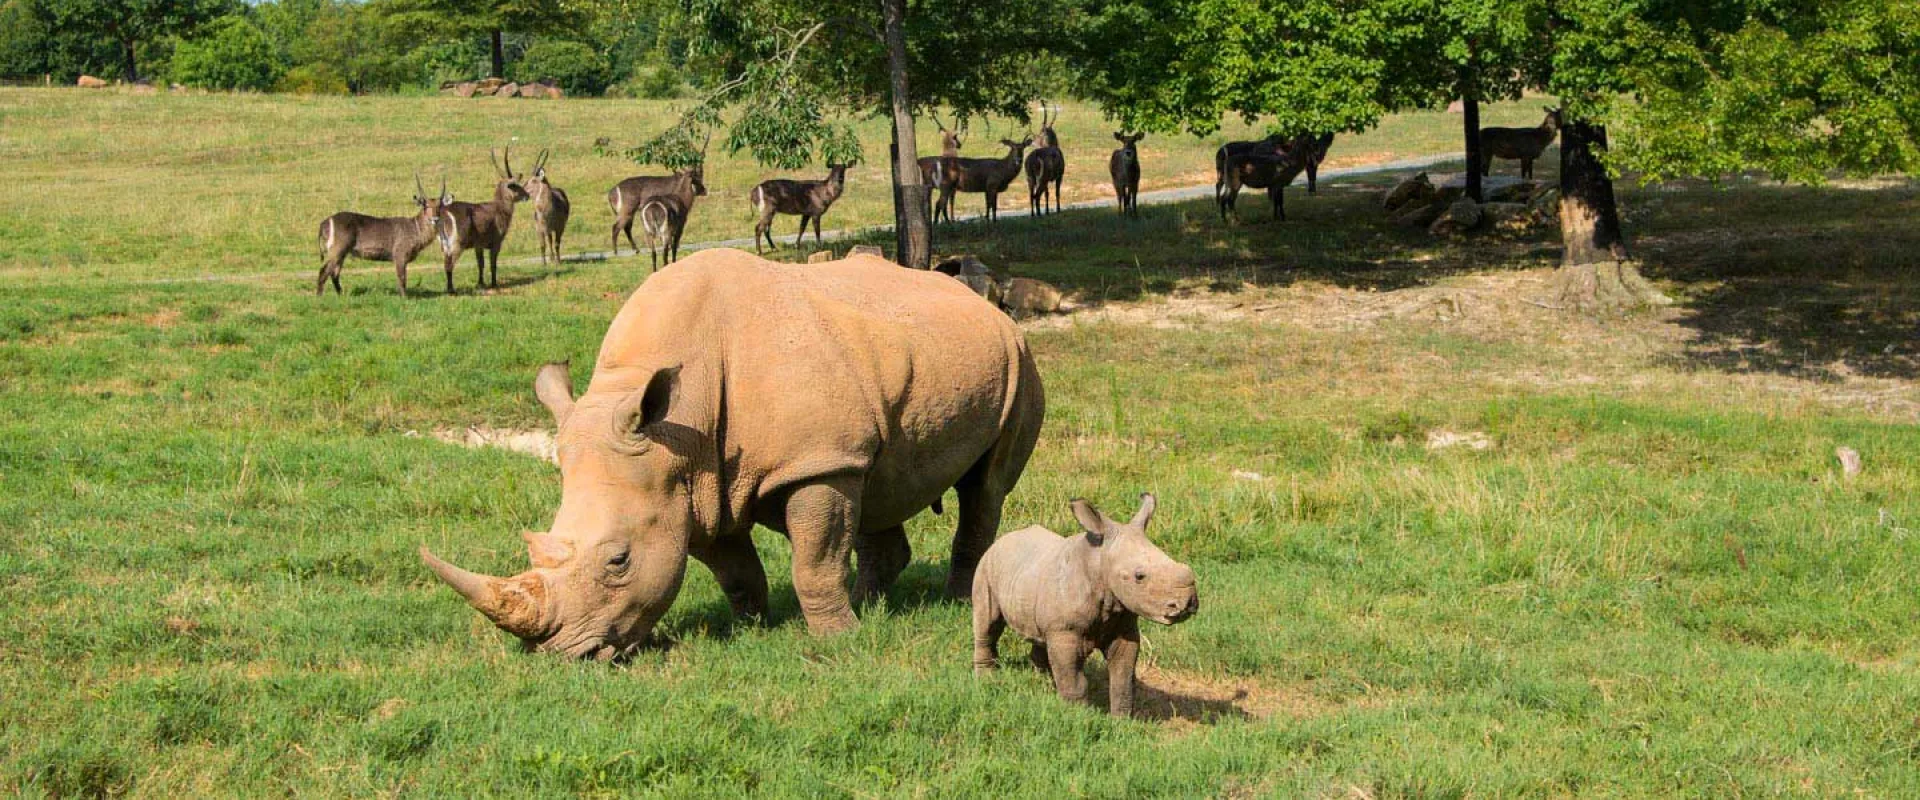 Rhinos: A Second Chance in Asheboro